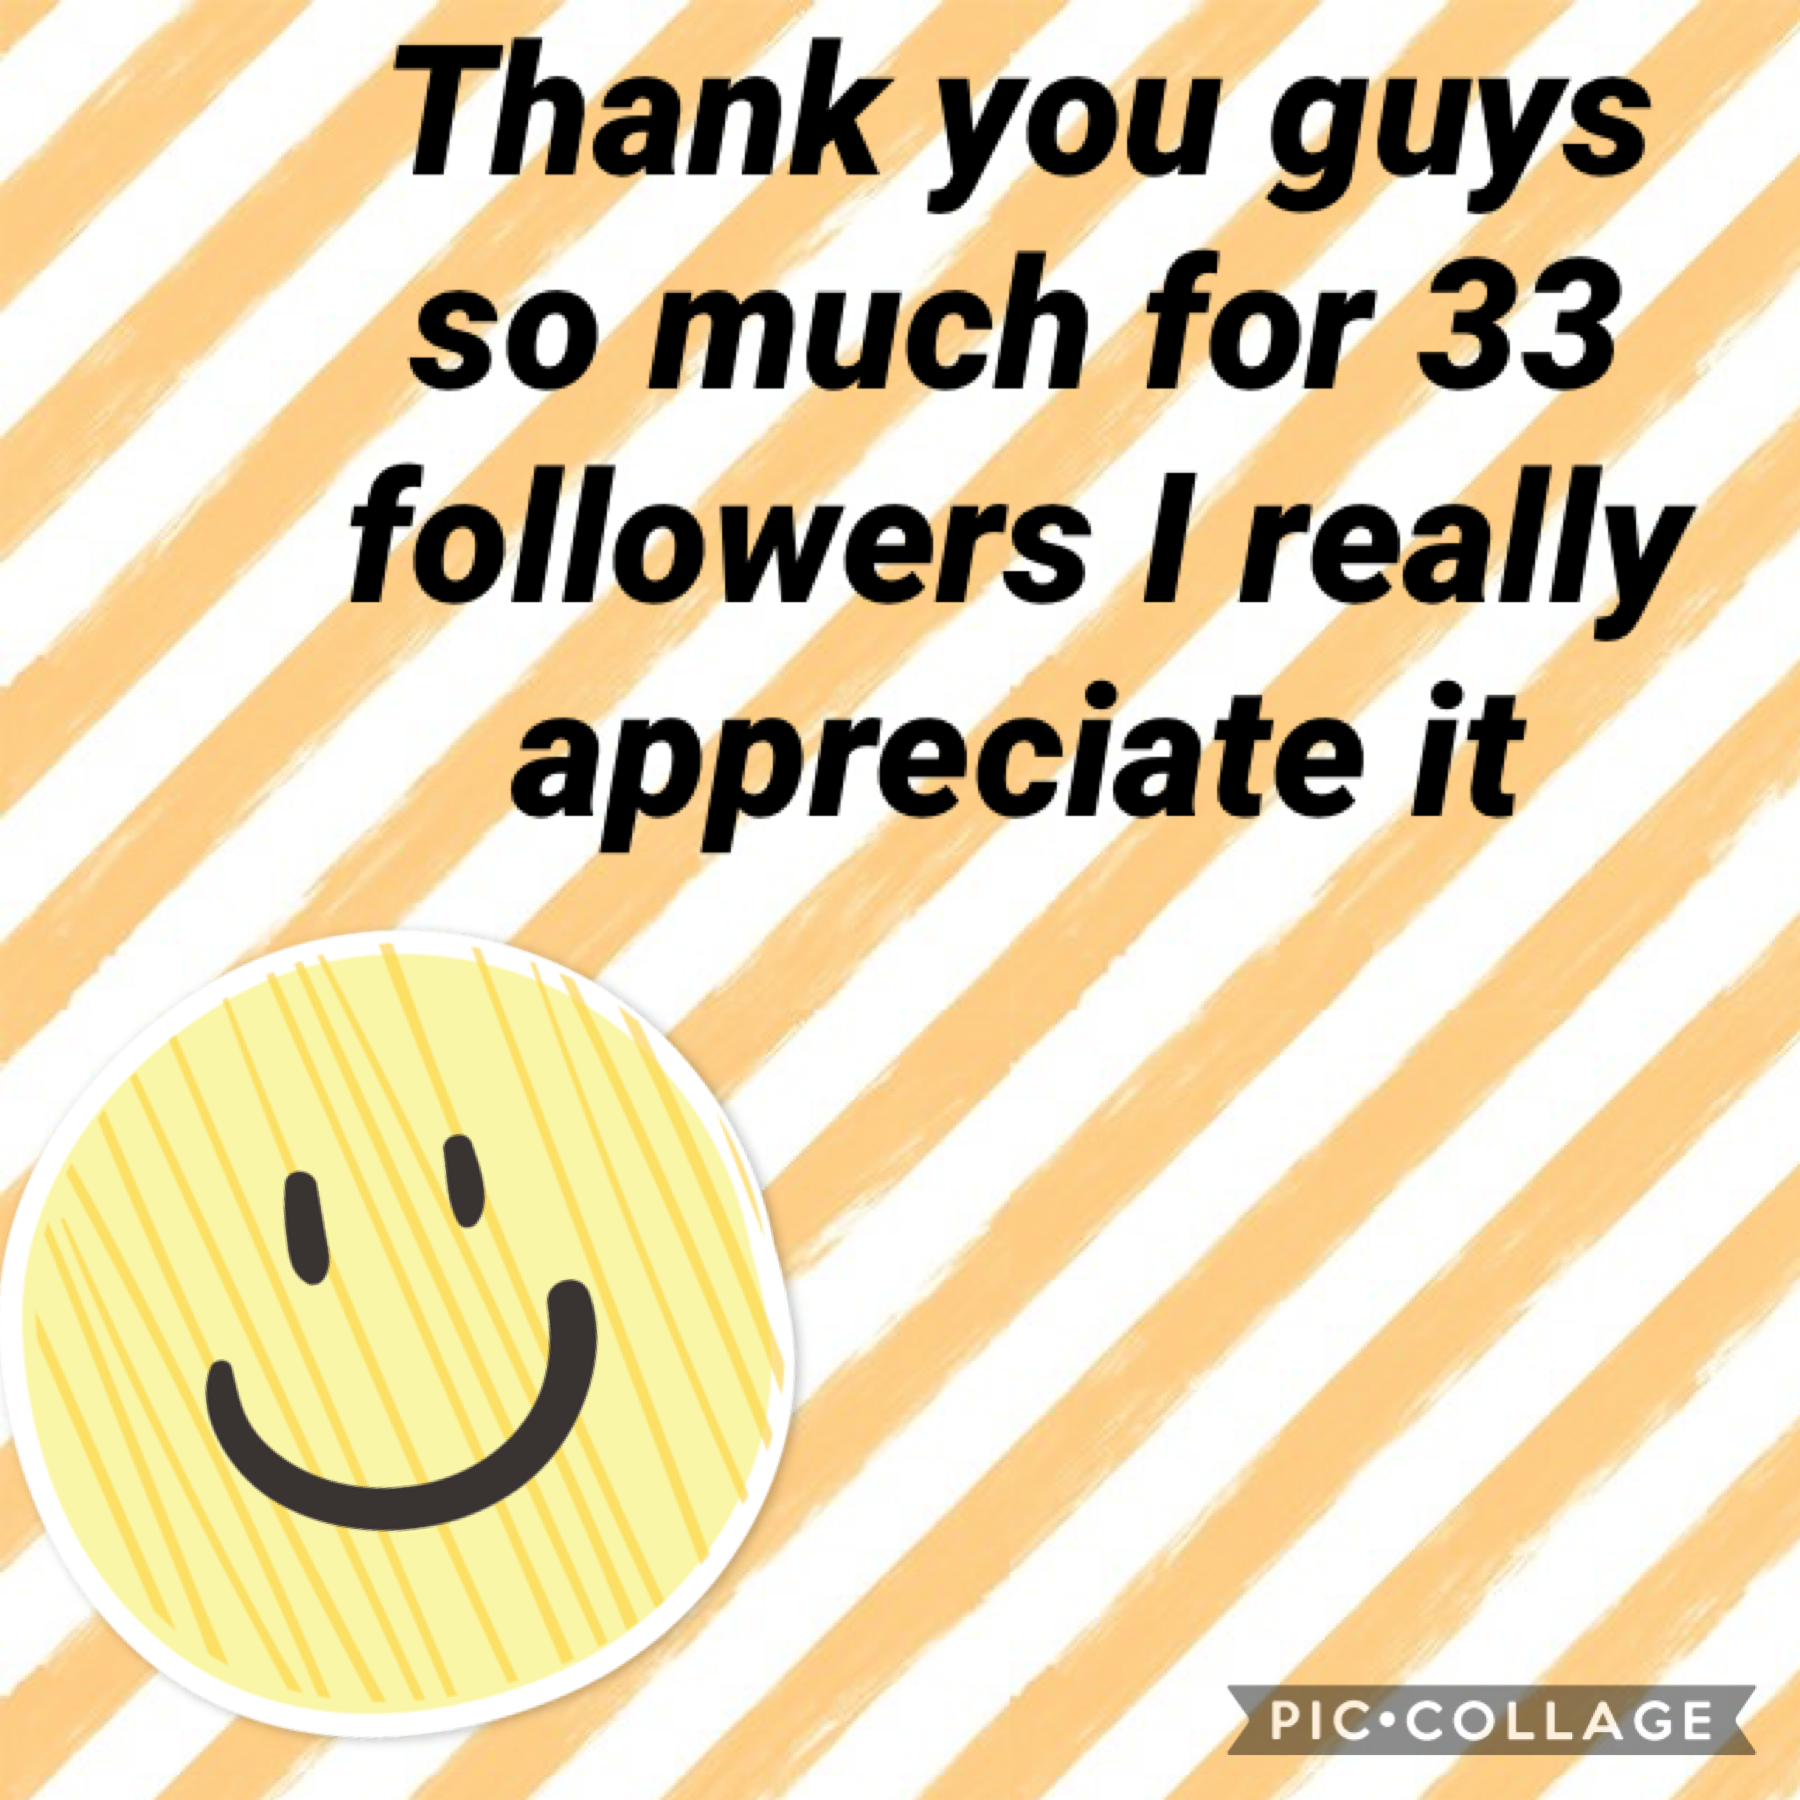 Thank you guys so much